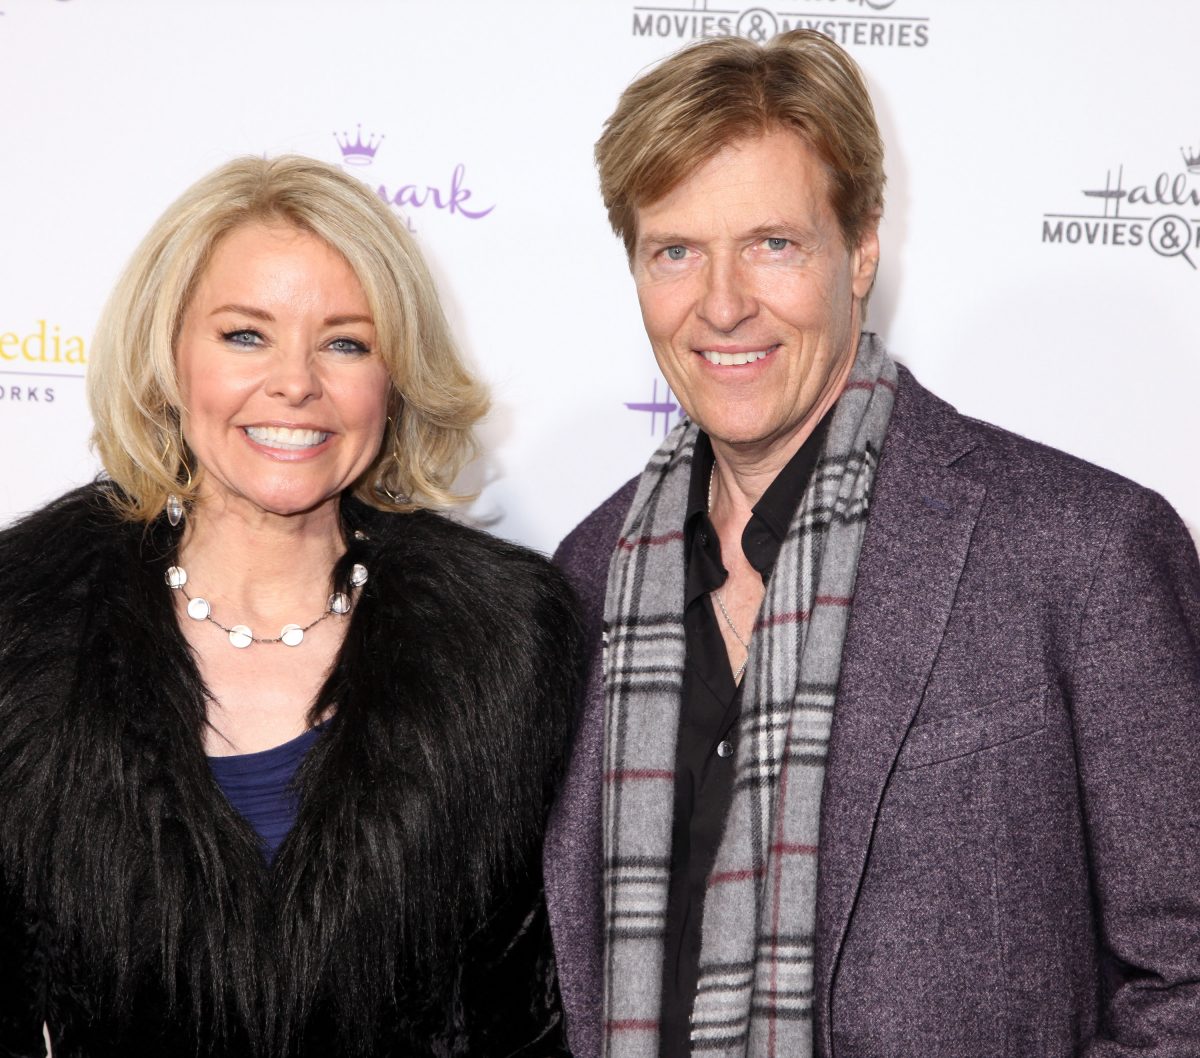 'General Hospital' stars Jack and Kristina Wagner during a red carpet appearance.